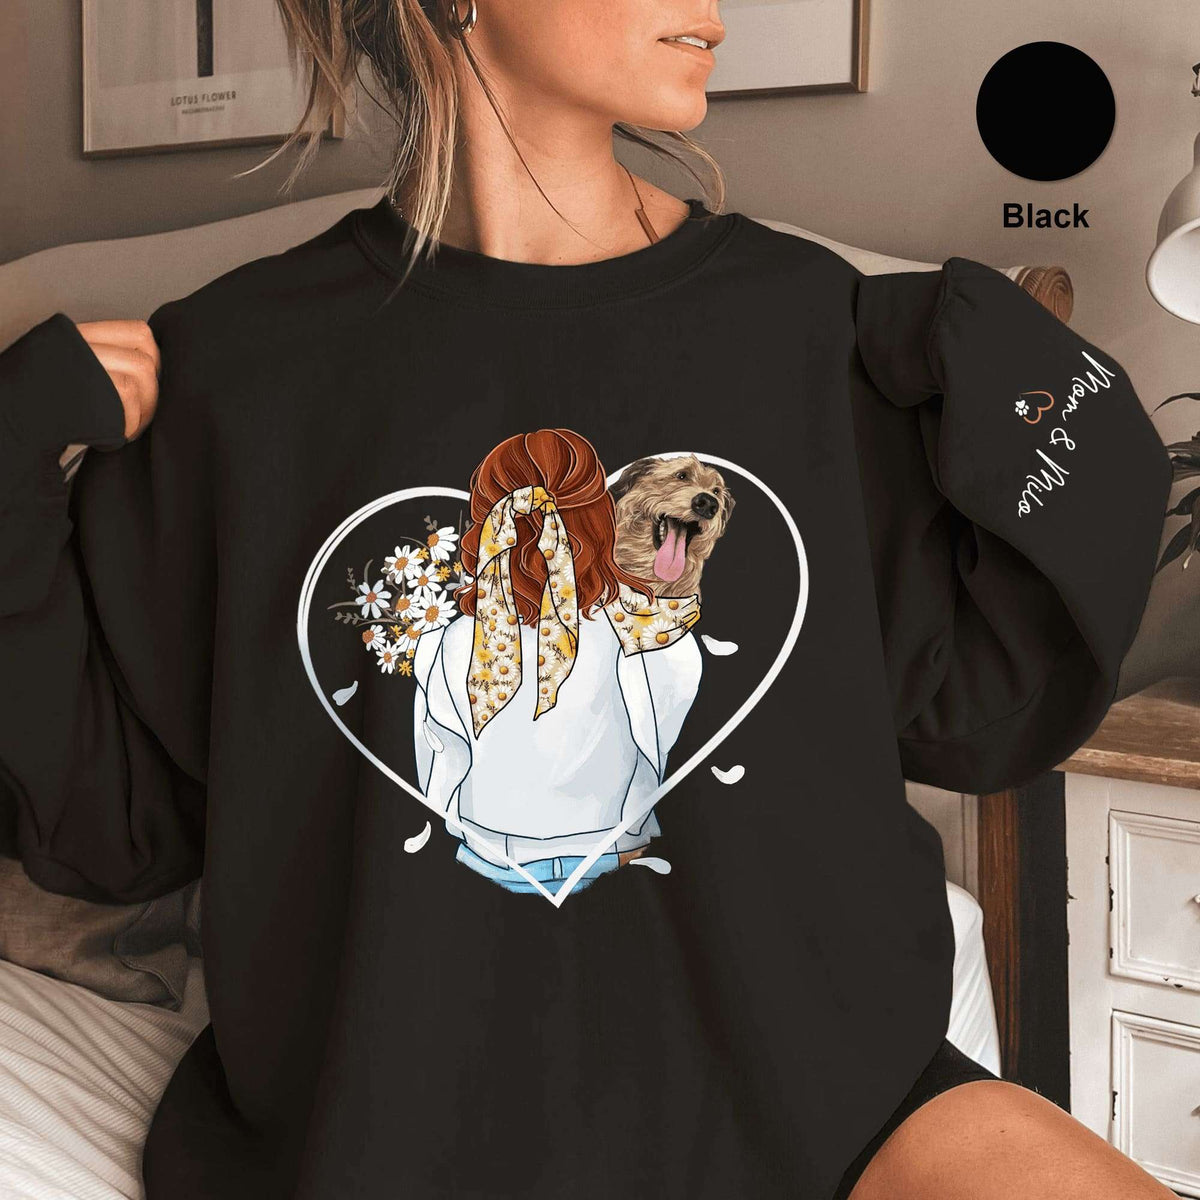 Match Clothes With My Dog Heart Sleeve Printed Standard Sweatshirt